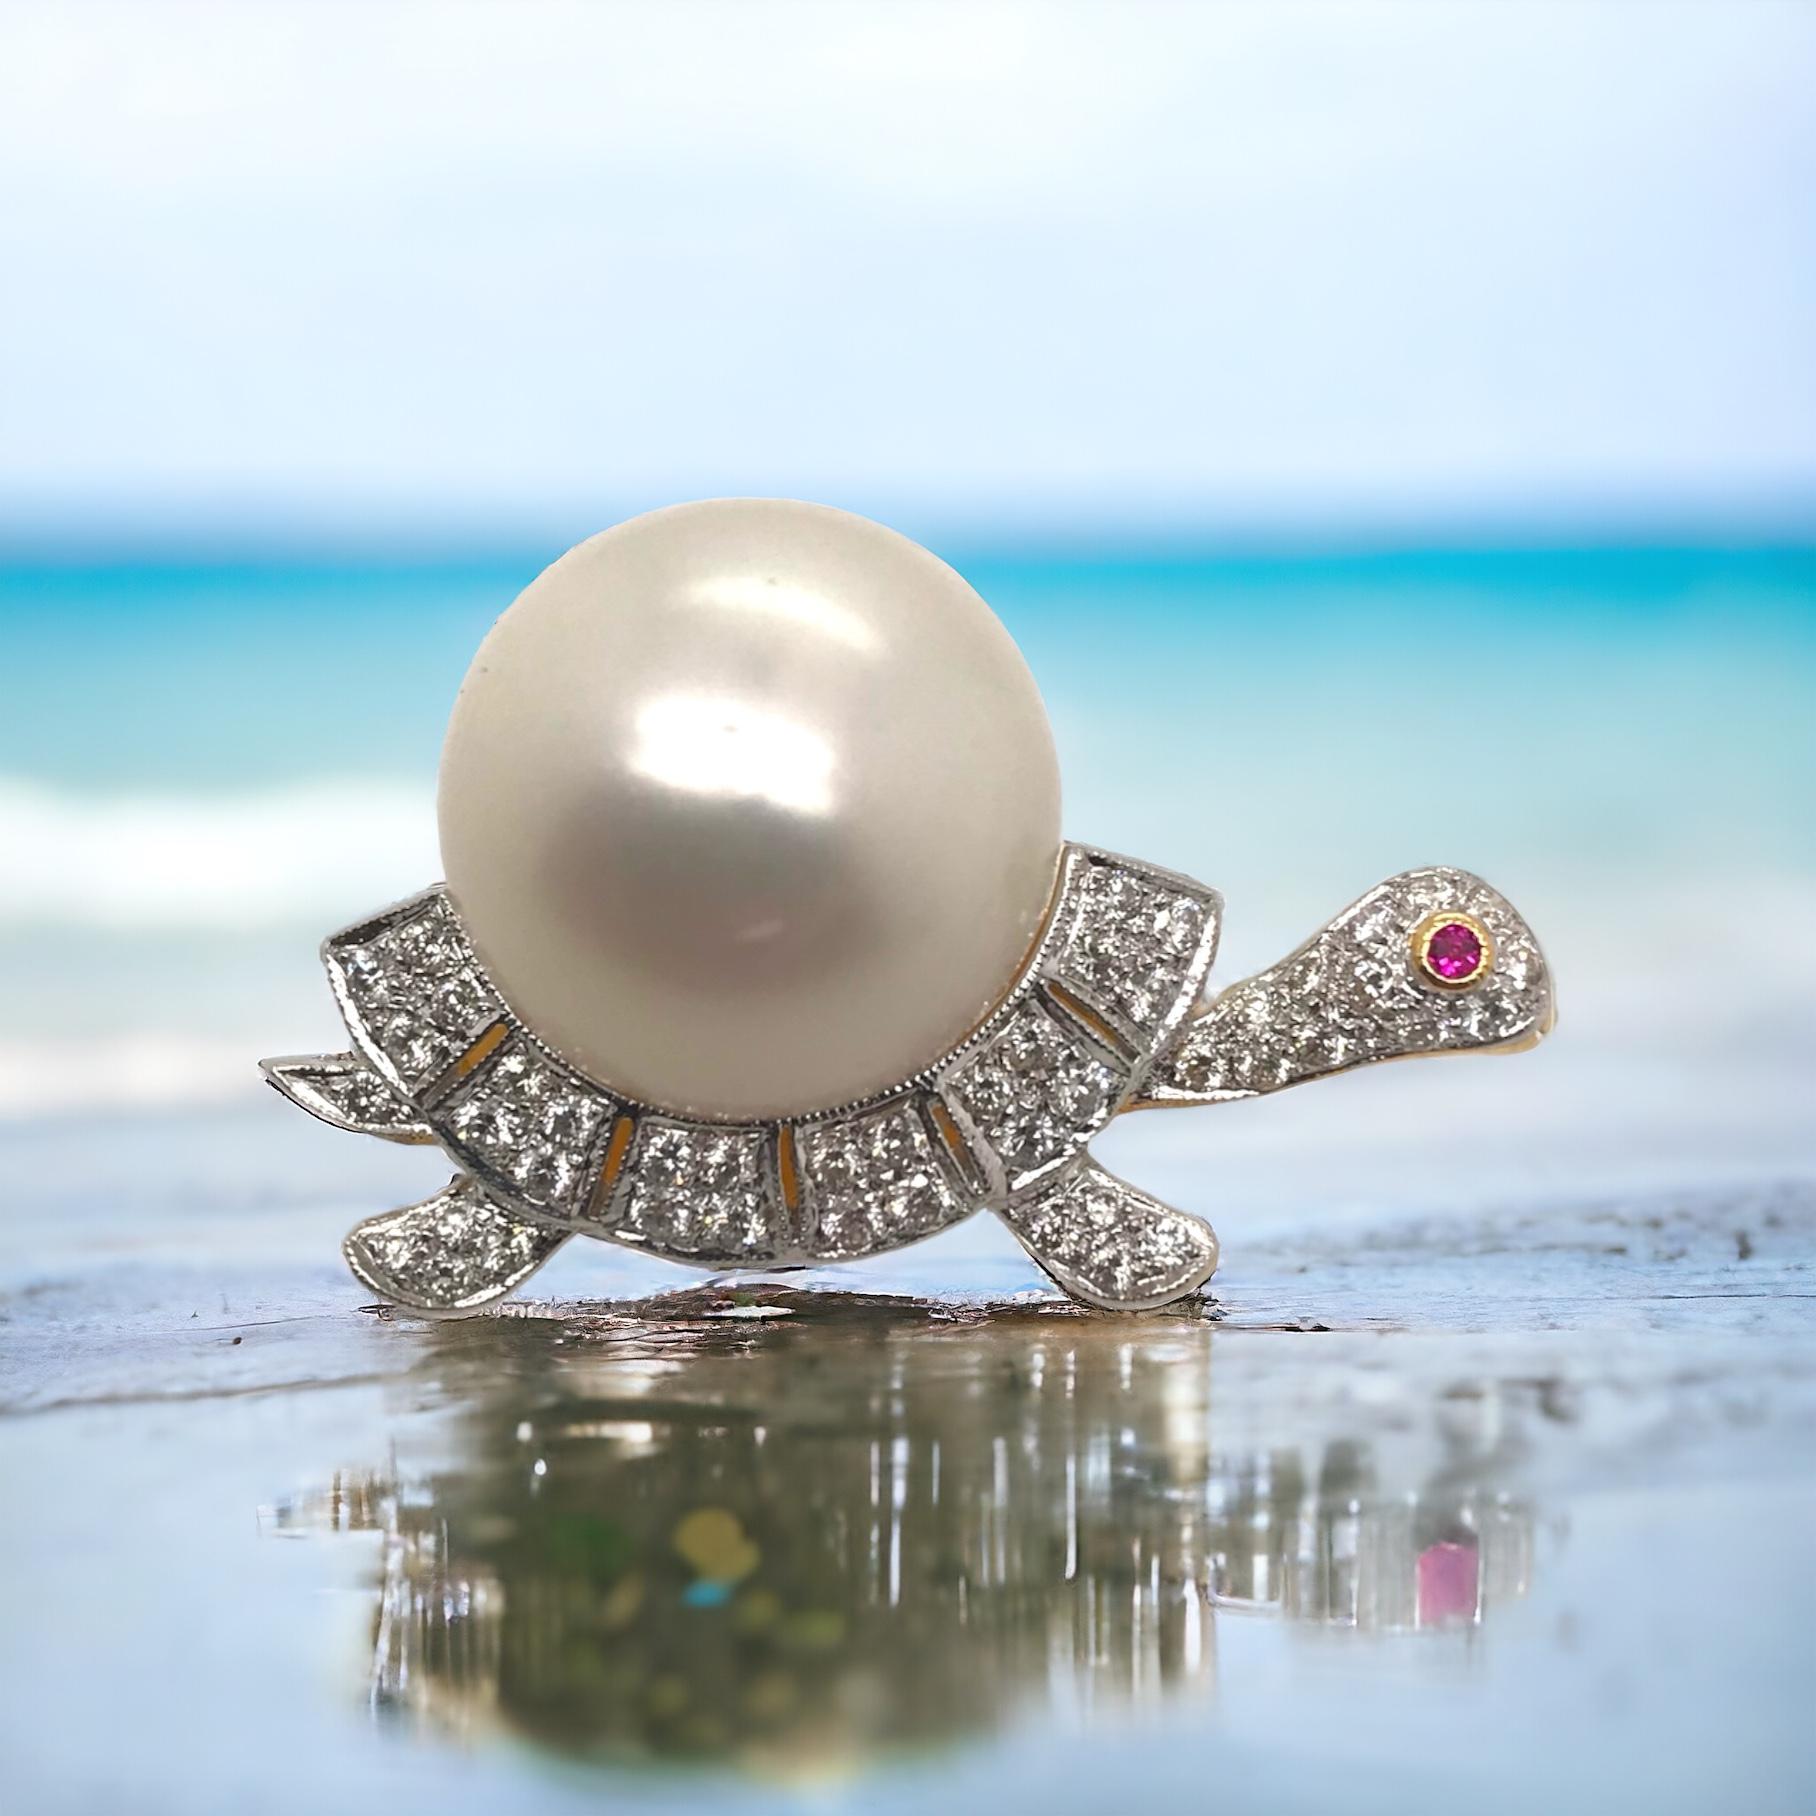 We are loving the artistic use of a beautiful saltwater pearl to fabricate this lovely piece!

Item Details
Material: 18K Yellow Gold Back; White Gold Front
45 - 1.4mm Round Brilliant Cut Diamonds; 0.01 Carat Each / 0.45 Carat Combined
1 - 1.5mm